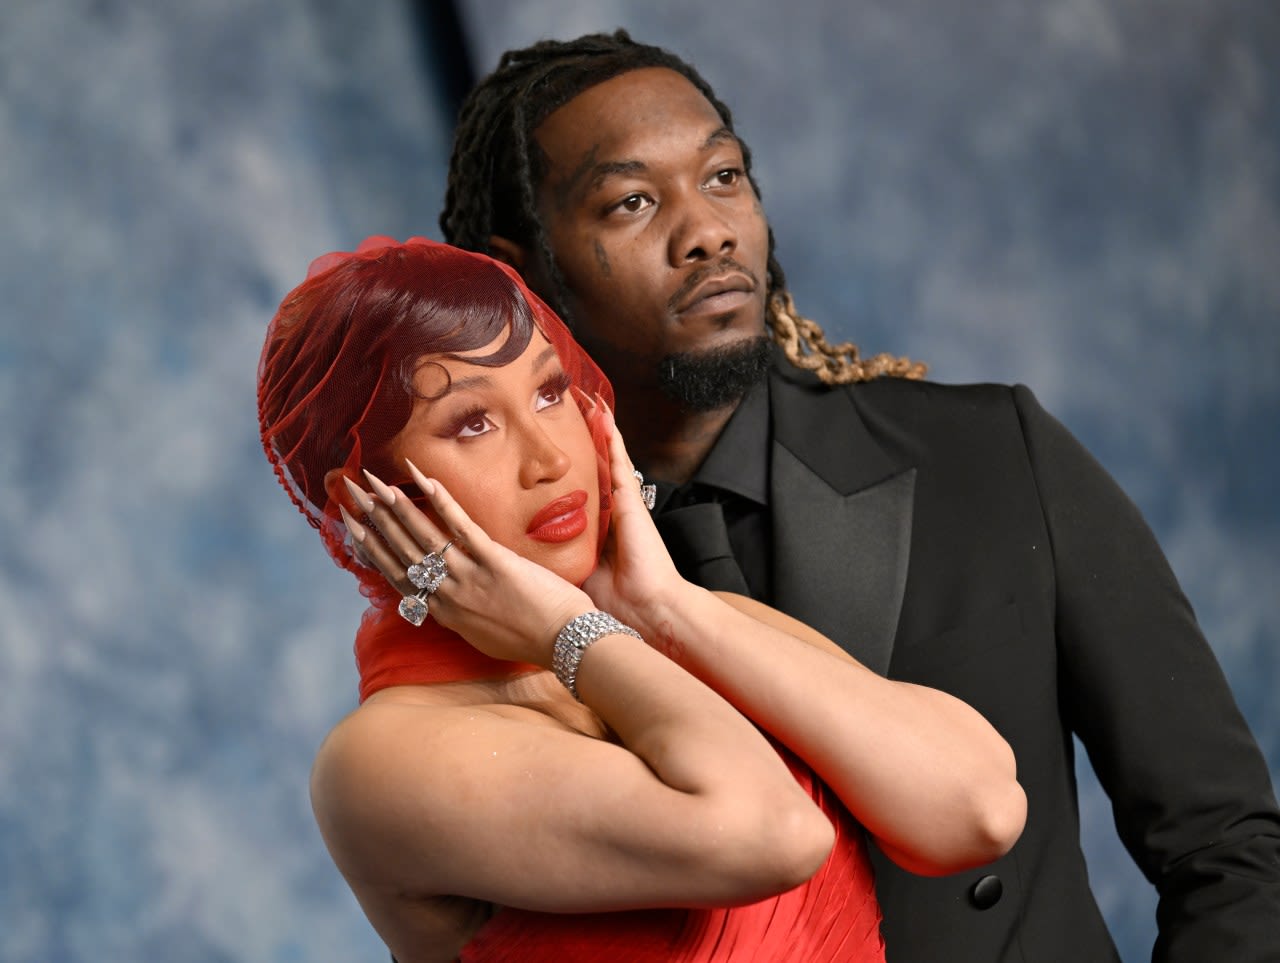 Cardi B asks court to award her primary custody of her children with Offset, divorce records show